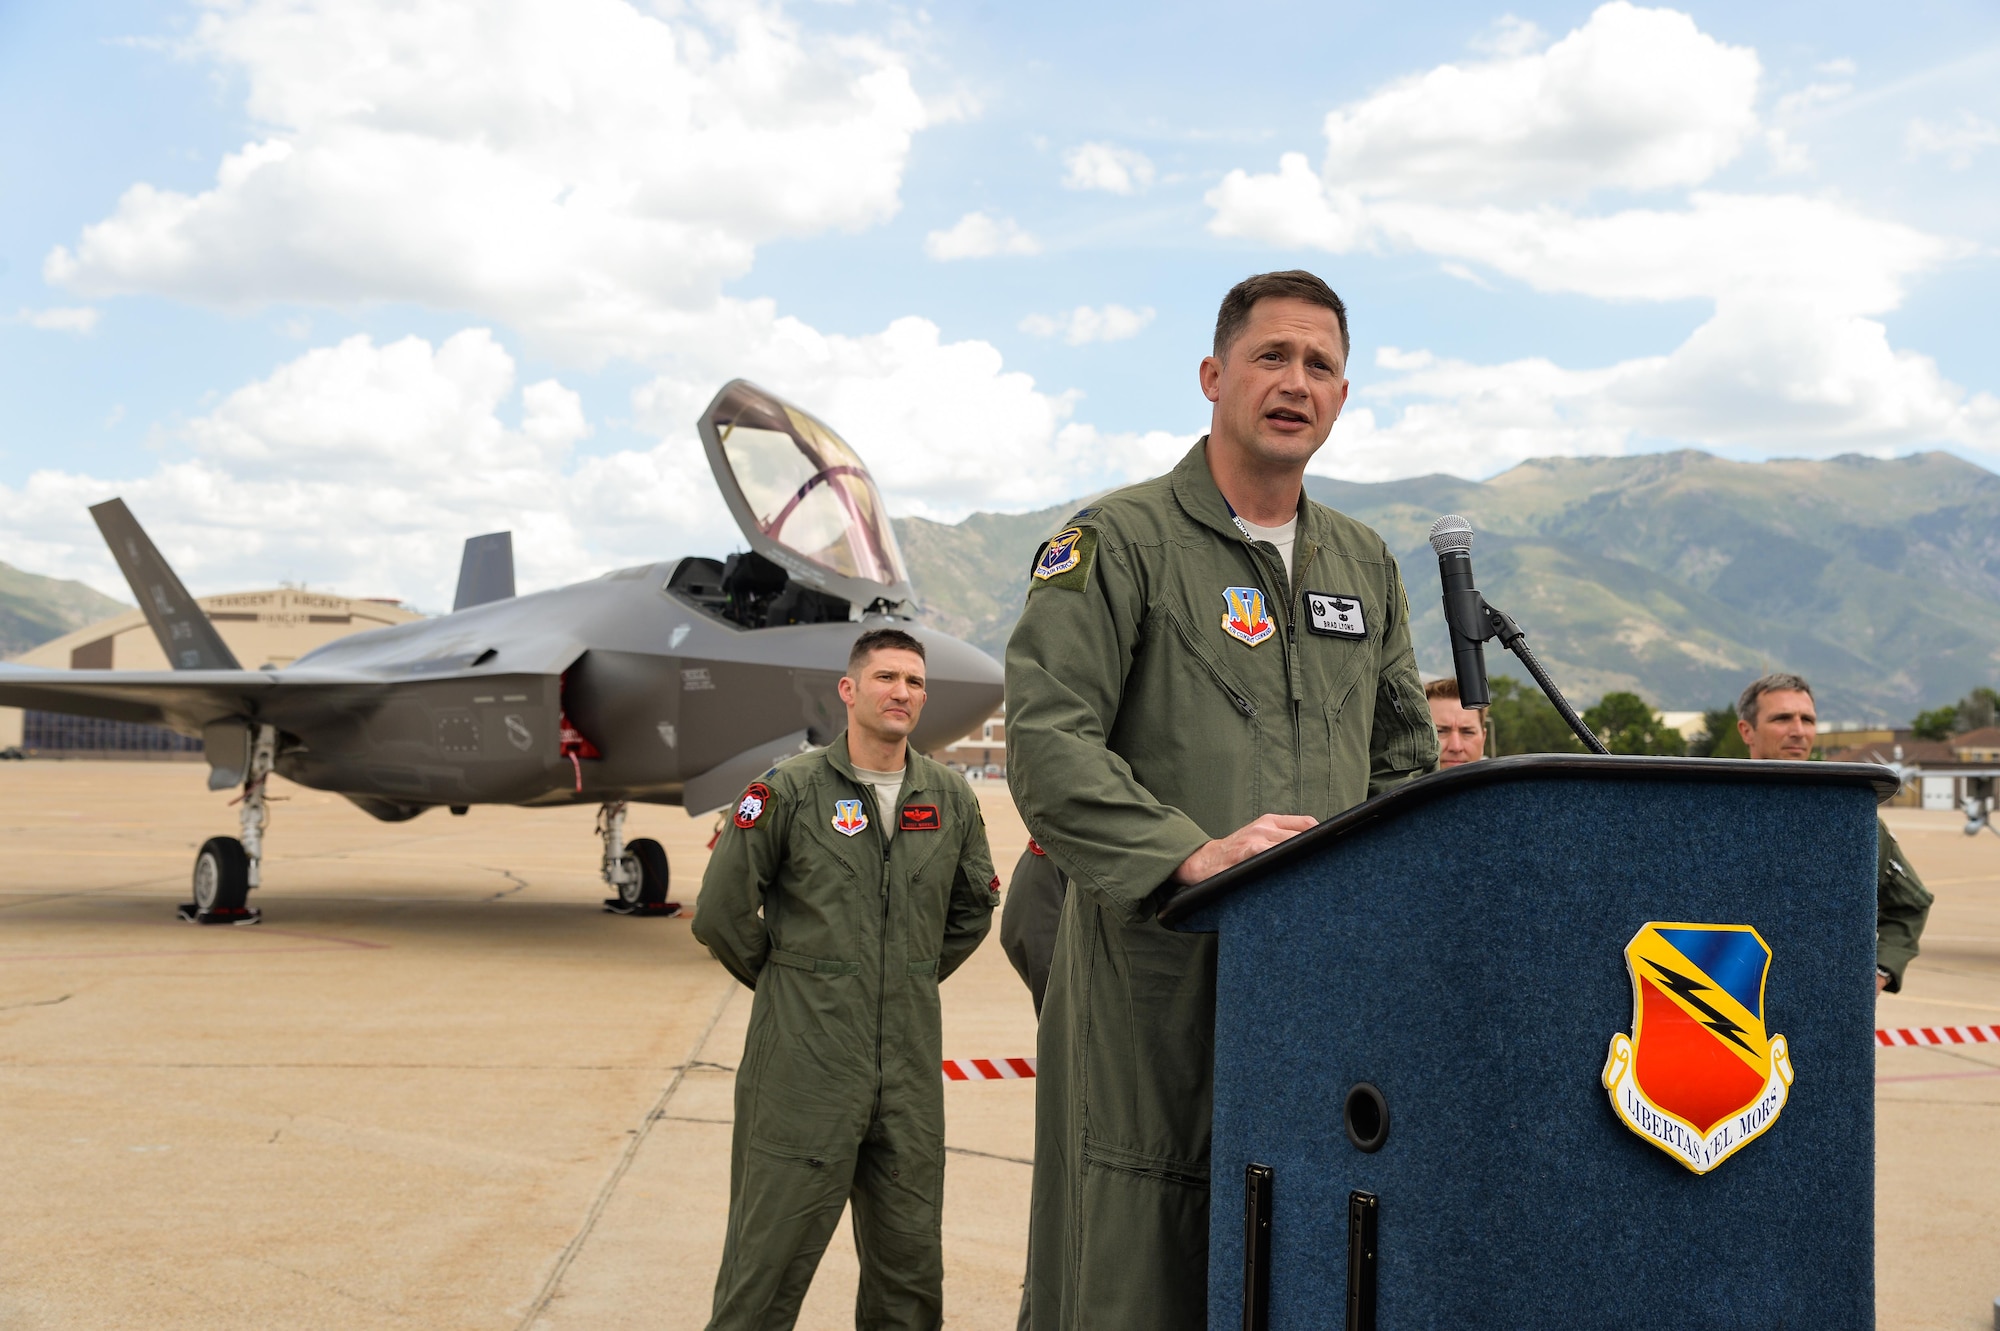 Col. David Lyons, 388th Fighter Wing commander, speaks to Airmen, civic leaders and media after delivering an operational F-35A Lightning II aircraft to Hill Air Force Base, Utah, Sept. 2, 2015. Lyons, along with Lt. Col. Yosef Morris, 34th Fighter Squadron director of operations, delivered the first two jets, known as AF-77 and AF-78, at approximately 1 p.m. MDT after a 90-minute flight from the F-35 production facility in Fort Worth, Texas.  These aircraft are the first two of up to 72 jets that will be assigned to both the active-duty 388th and Reserve 419th Fighter Wings at Hill. (U.S. Air Force photo by Ron Bradshaw/Released)